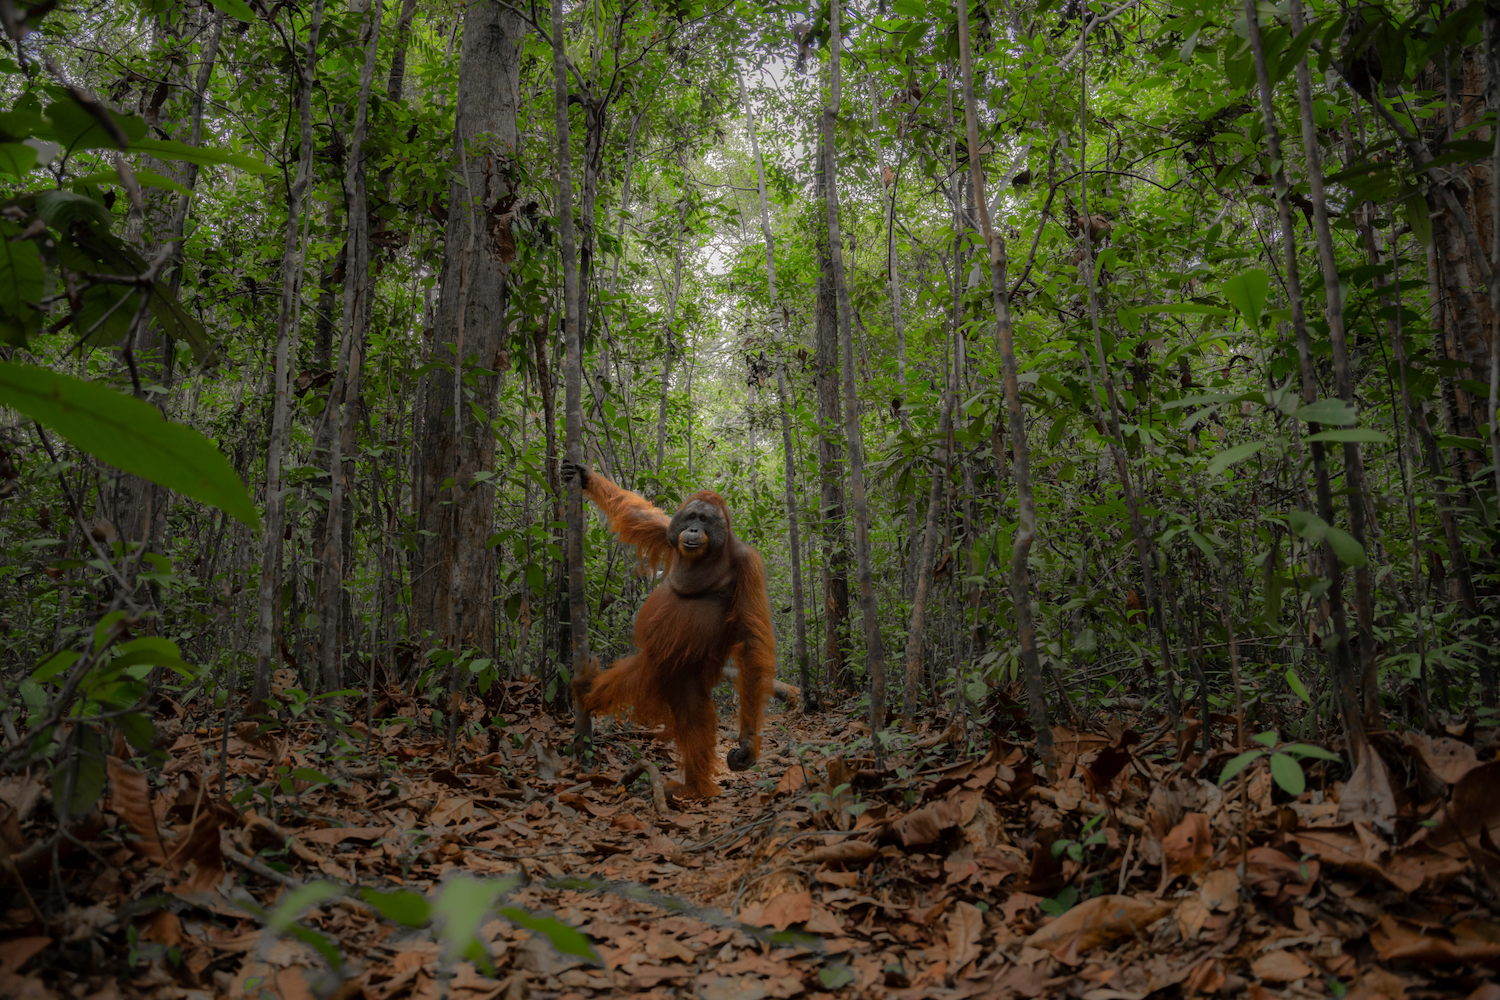 a large orangutan stands in the woods holding a tree